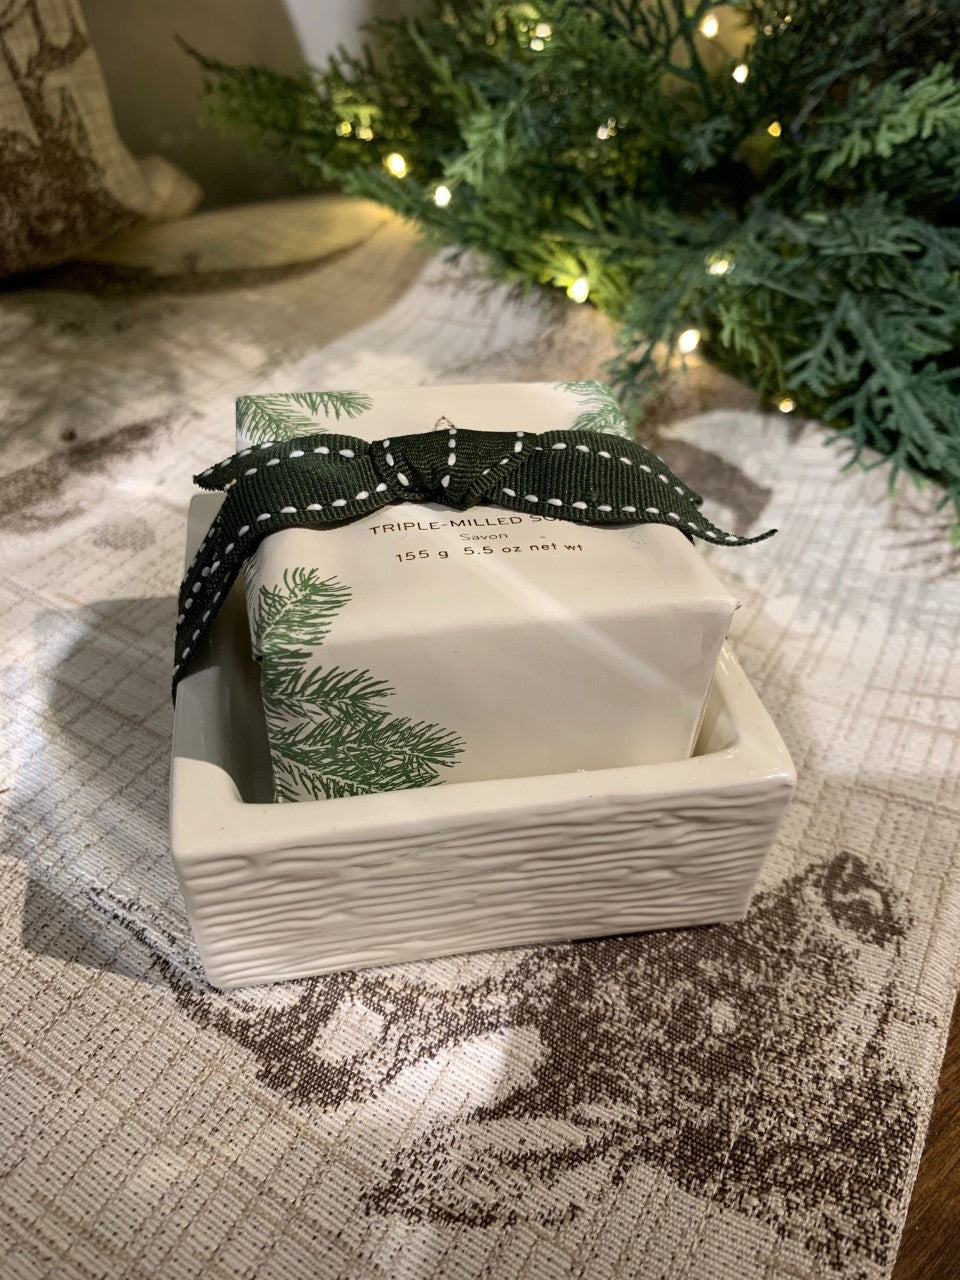 Thymes Frasier Fir Triple Milled Soap in Dish